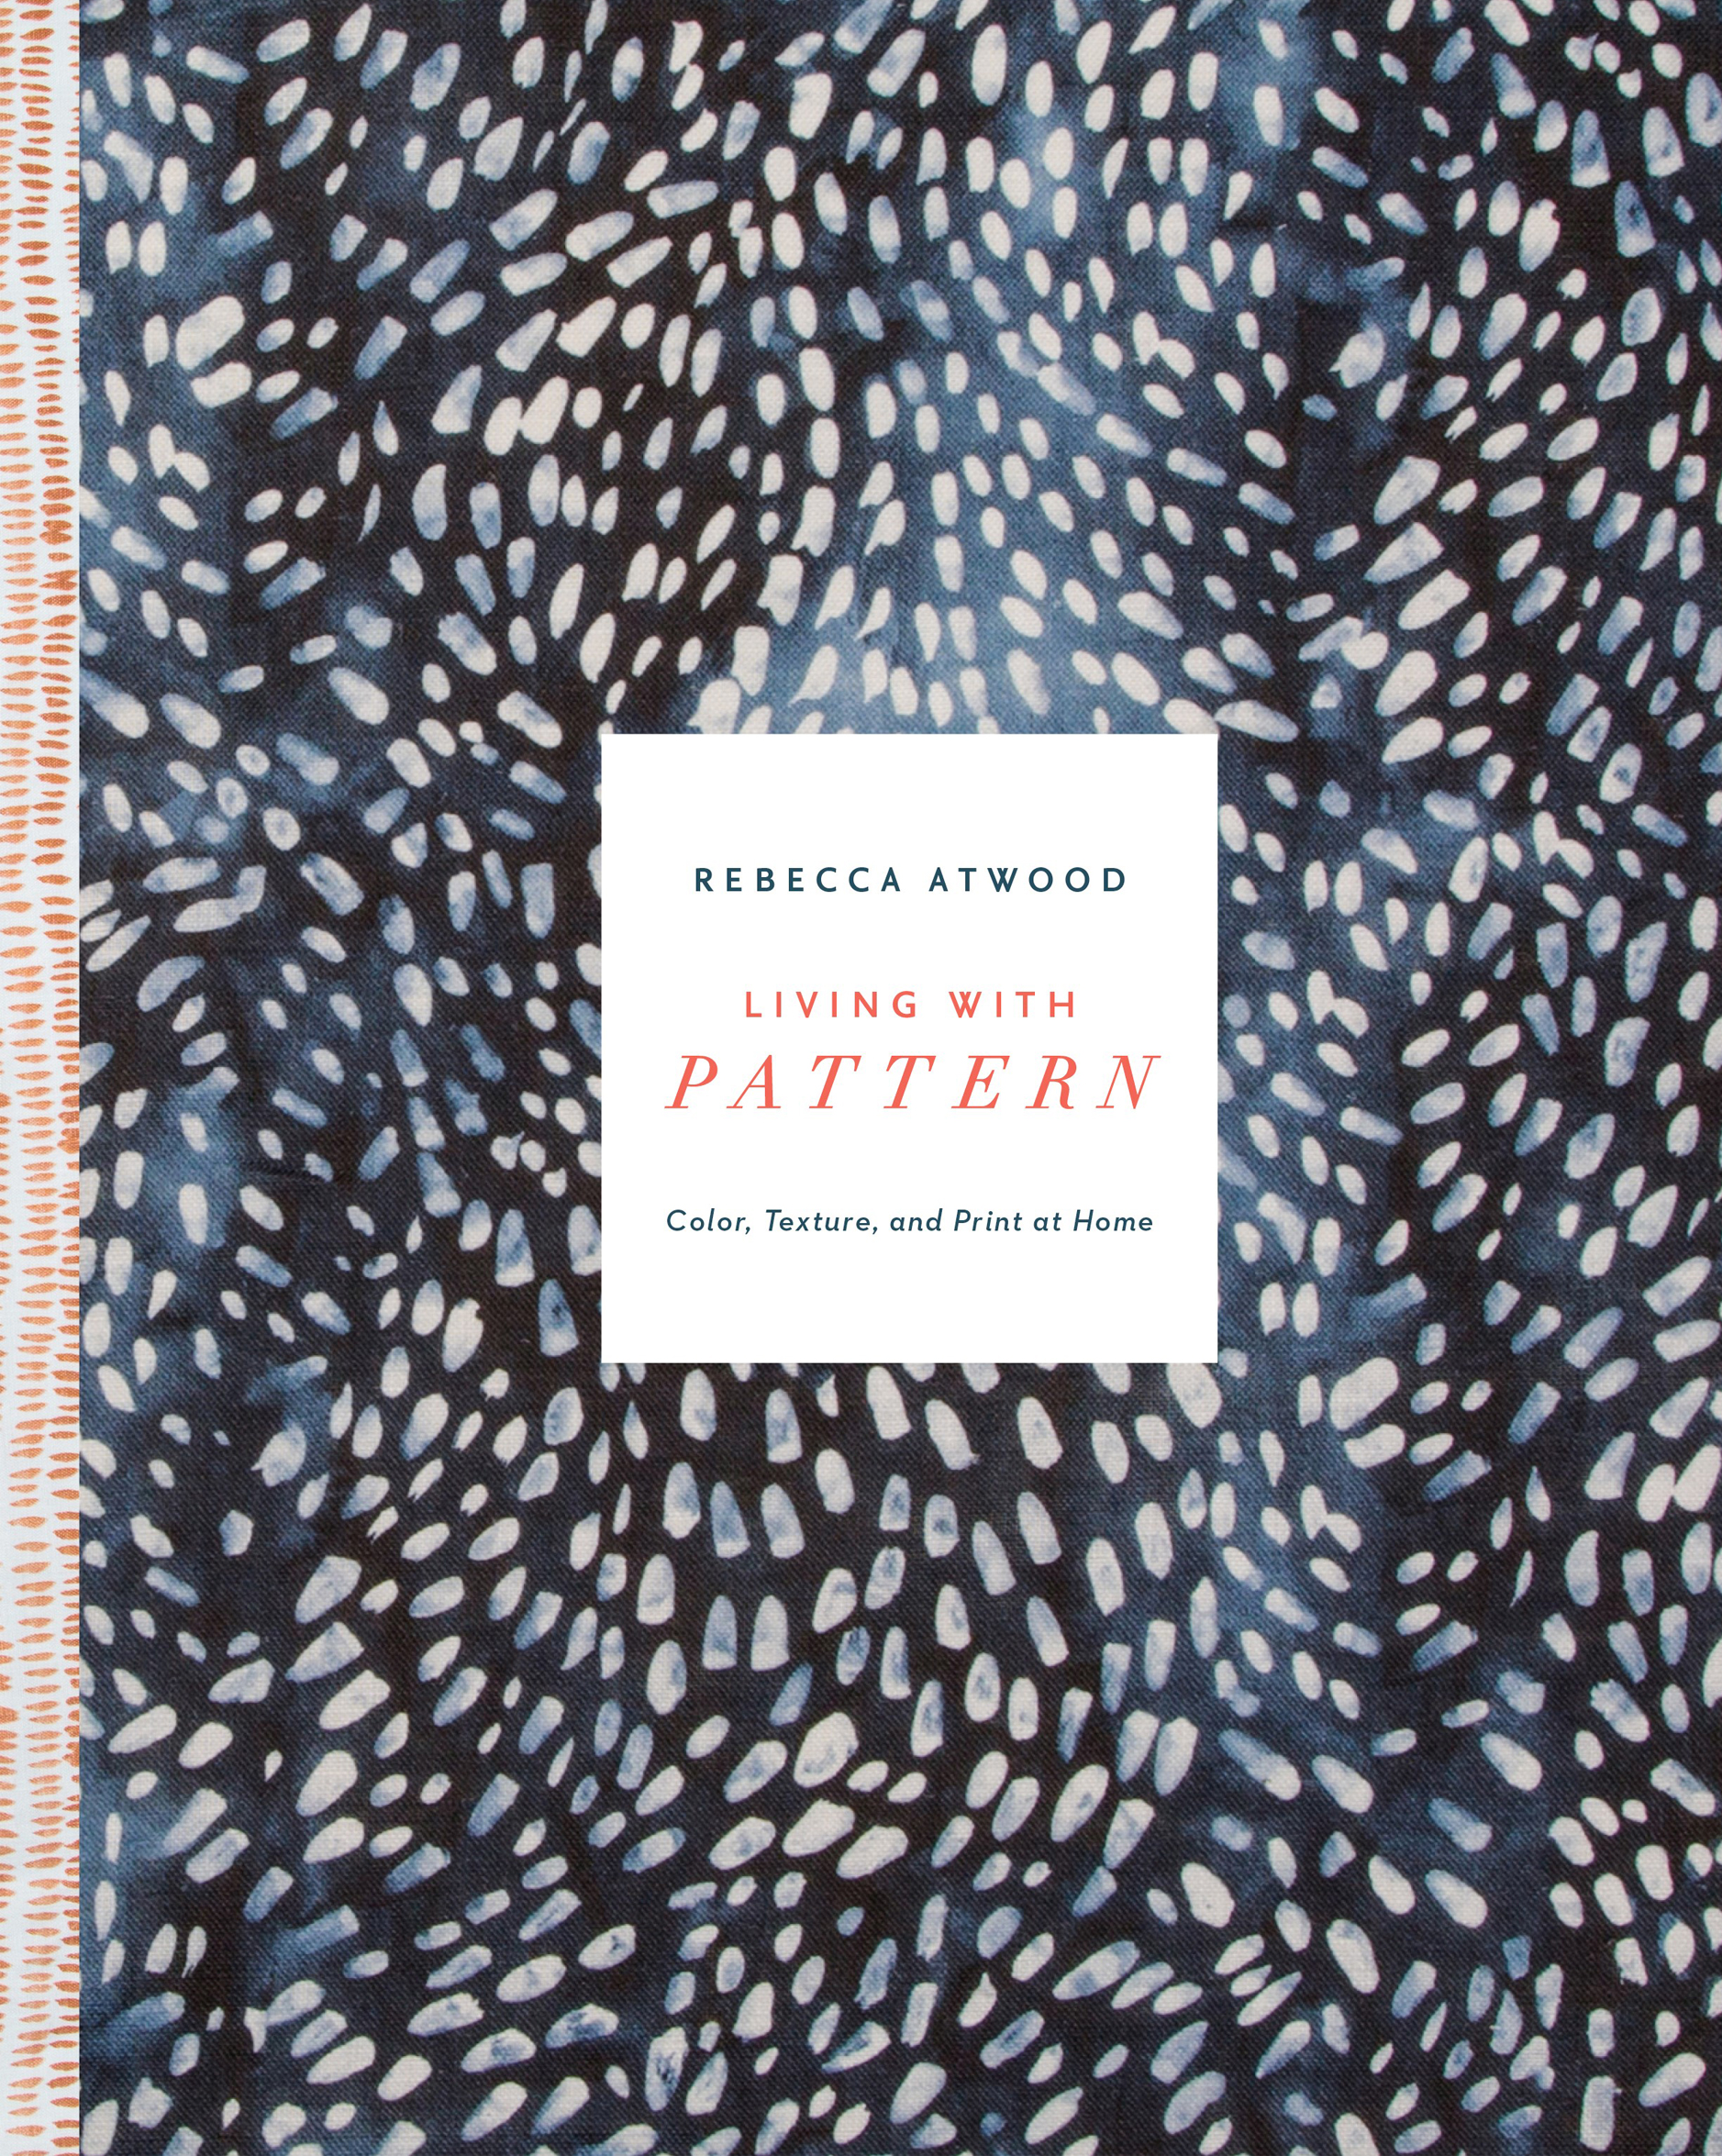 Rebecca-Atwood-Living-With-Pattern-Book-Review-6